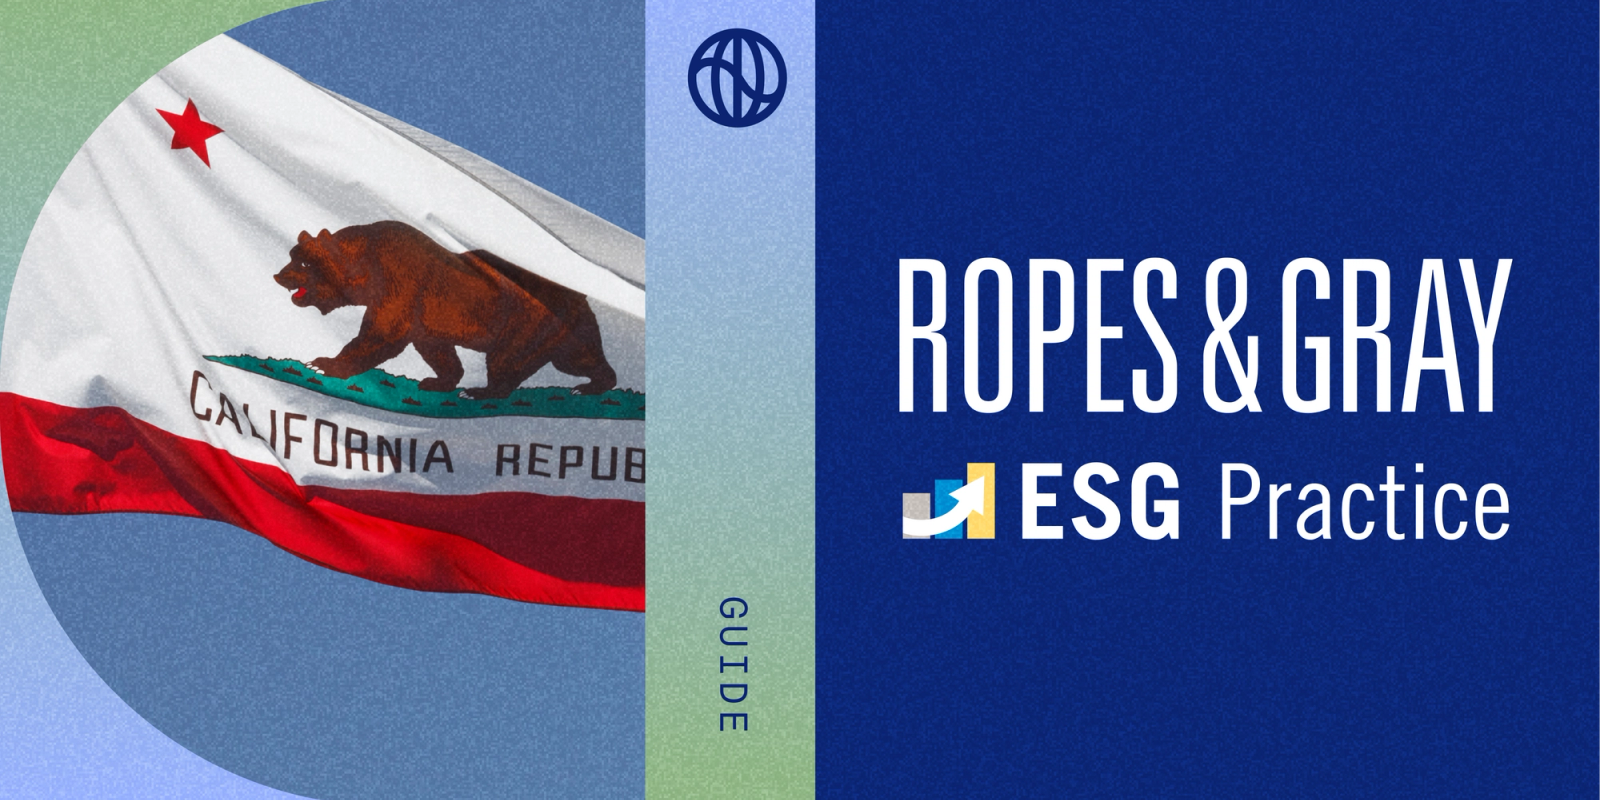 ropes and grey logo with the sec building, watershed logo and text: Guide